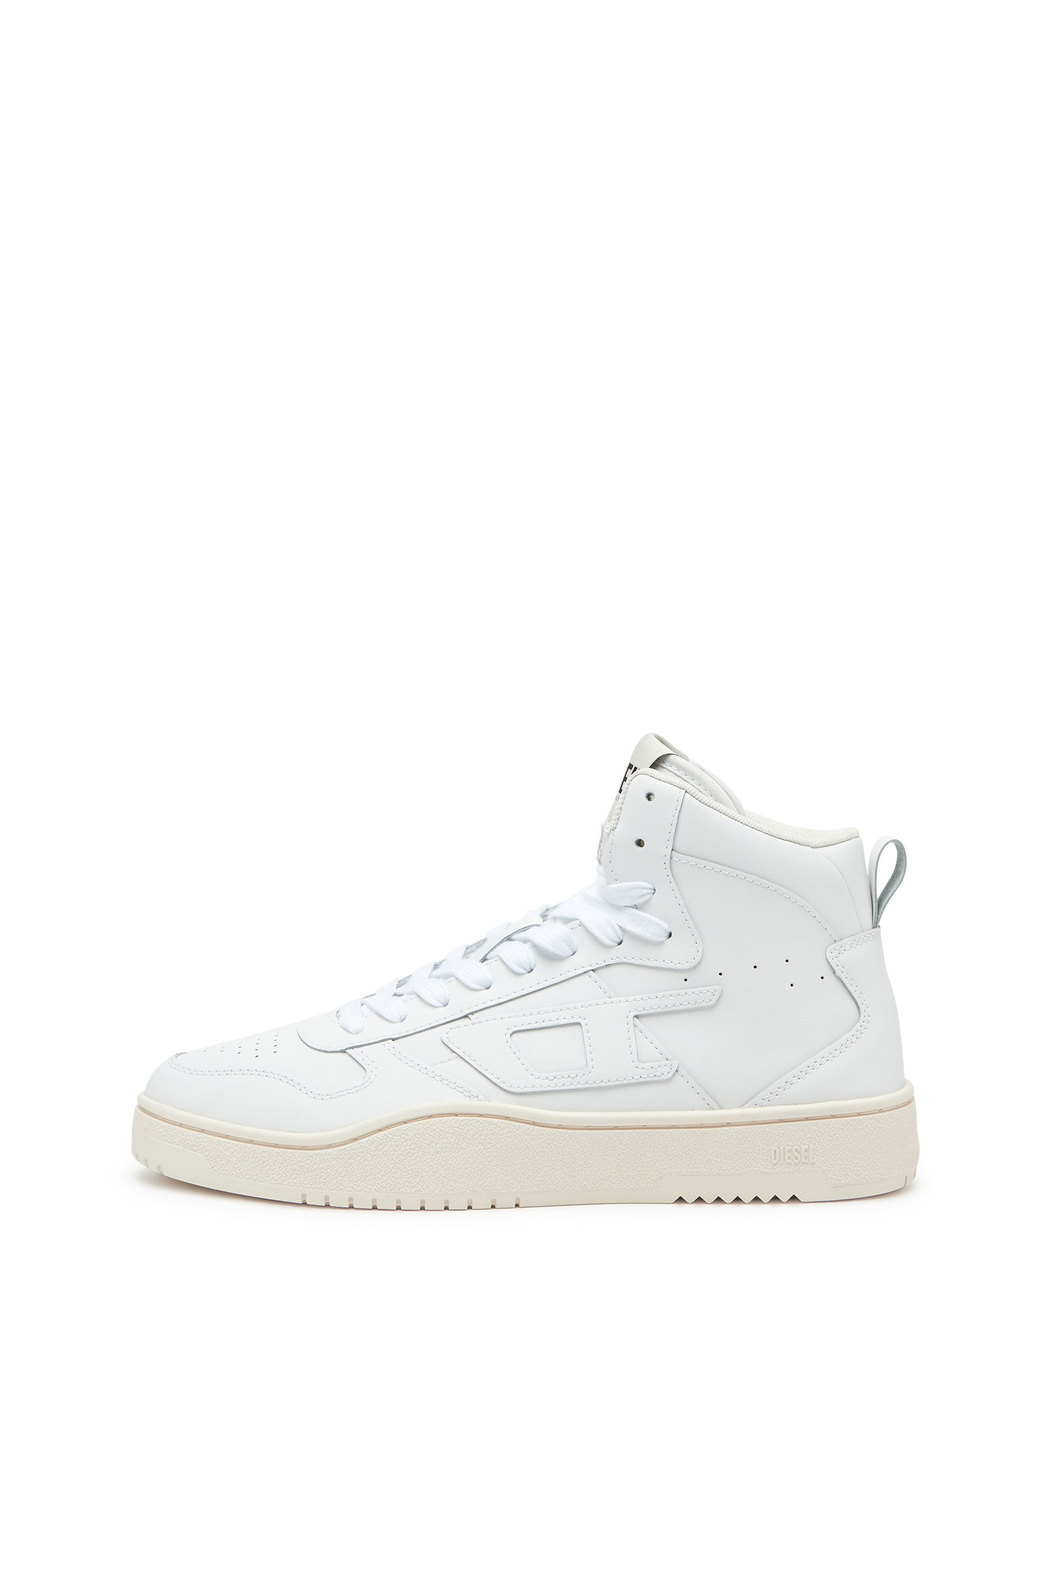 S-Ukiyo V2 Mid - High-top sneakers in leather and nylon